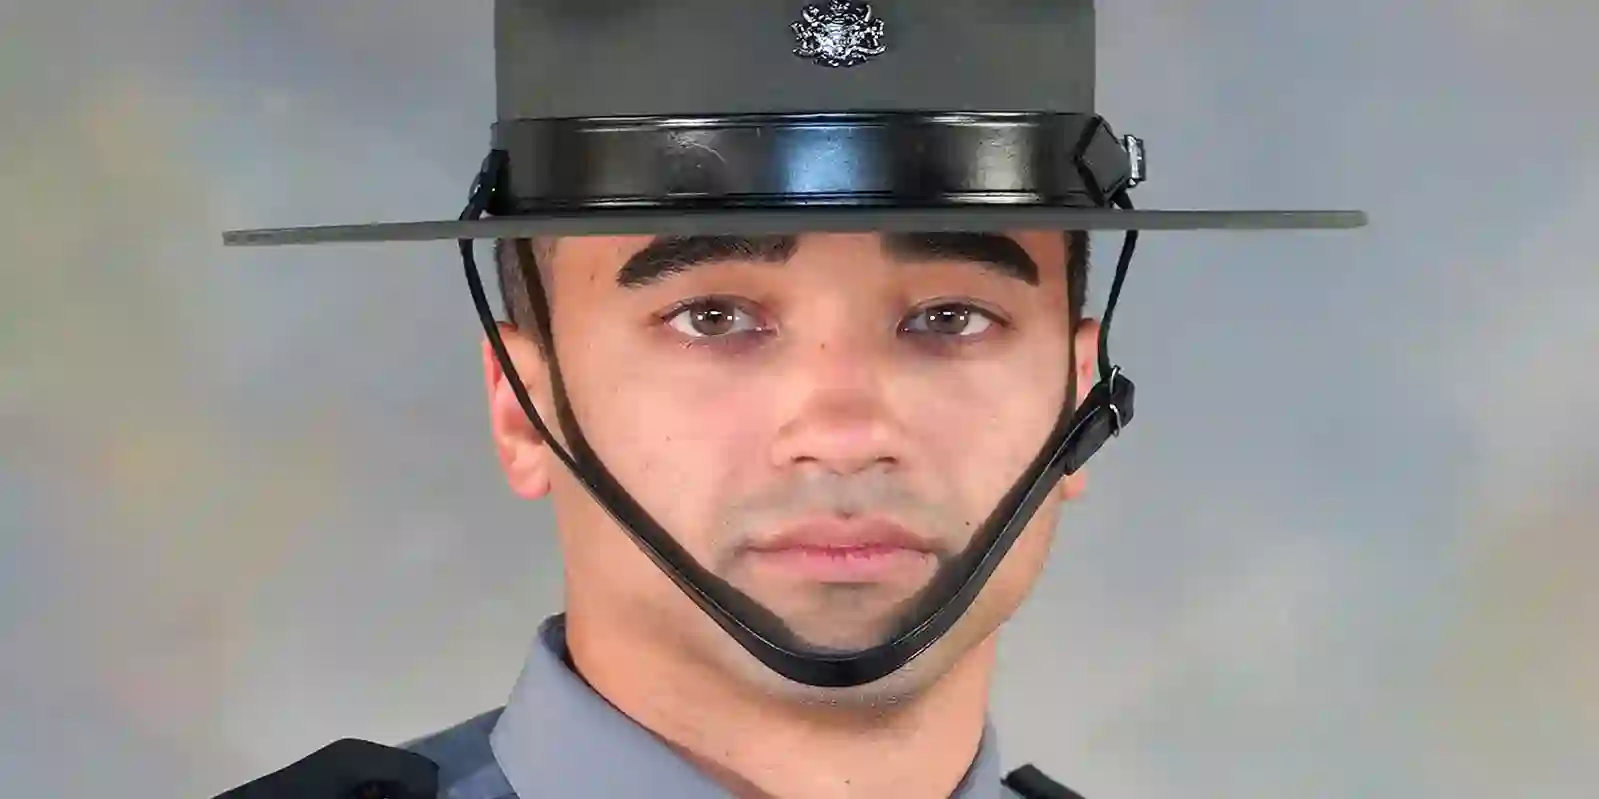 Pennsylvania Police Trooper Jacques F. Rougeau Jr. [Photo: Erie Times News]